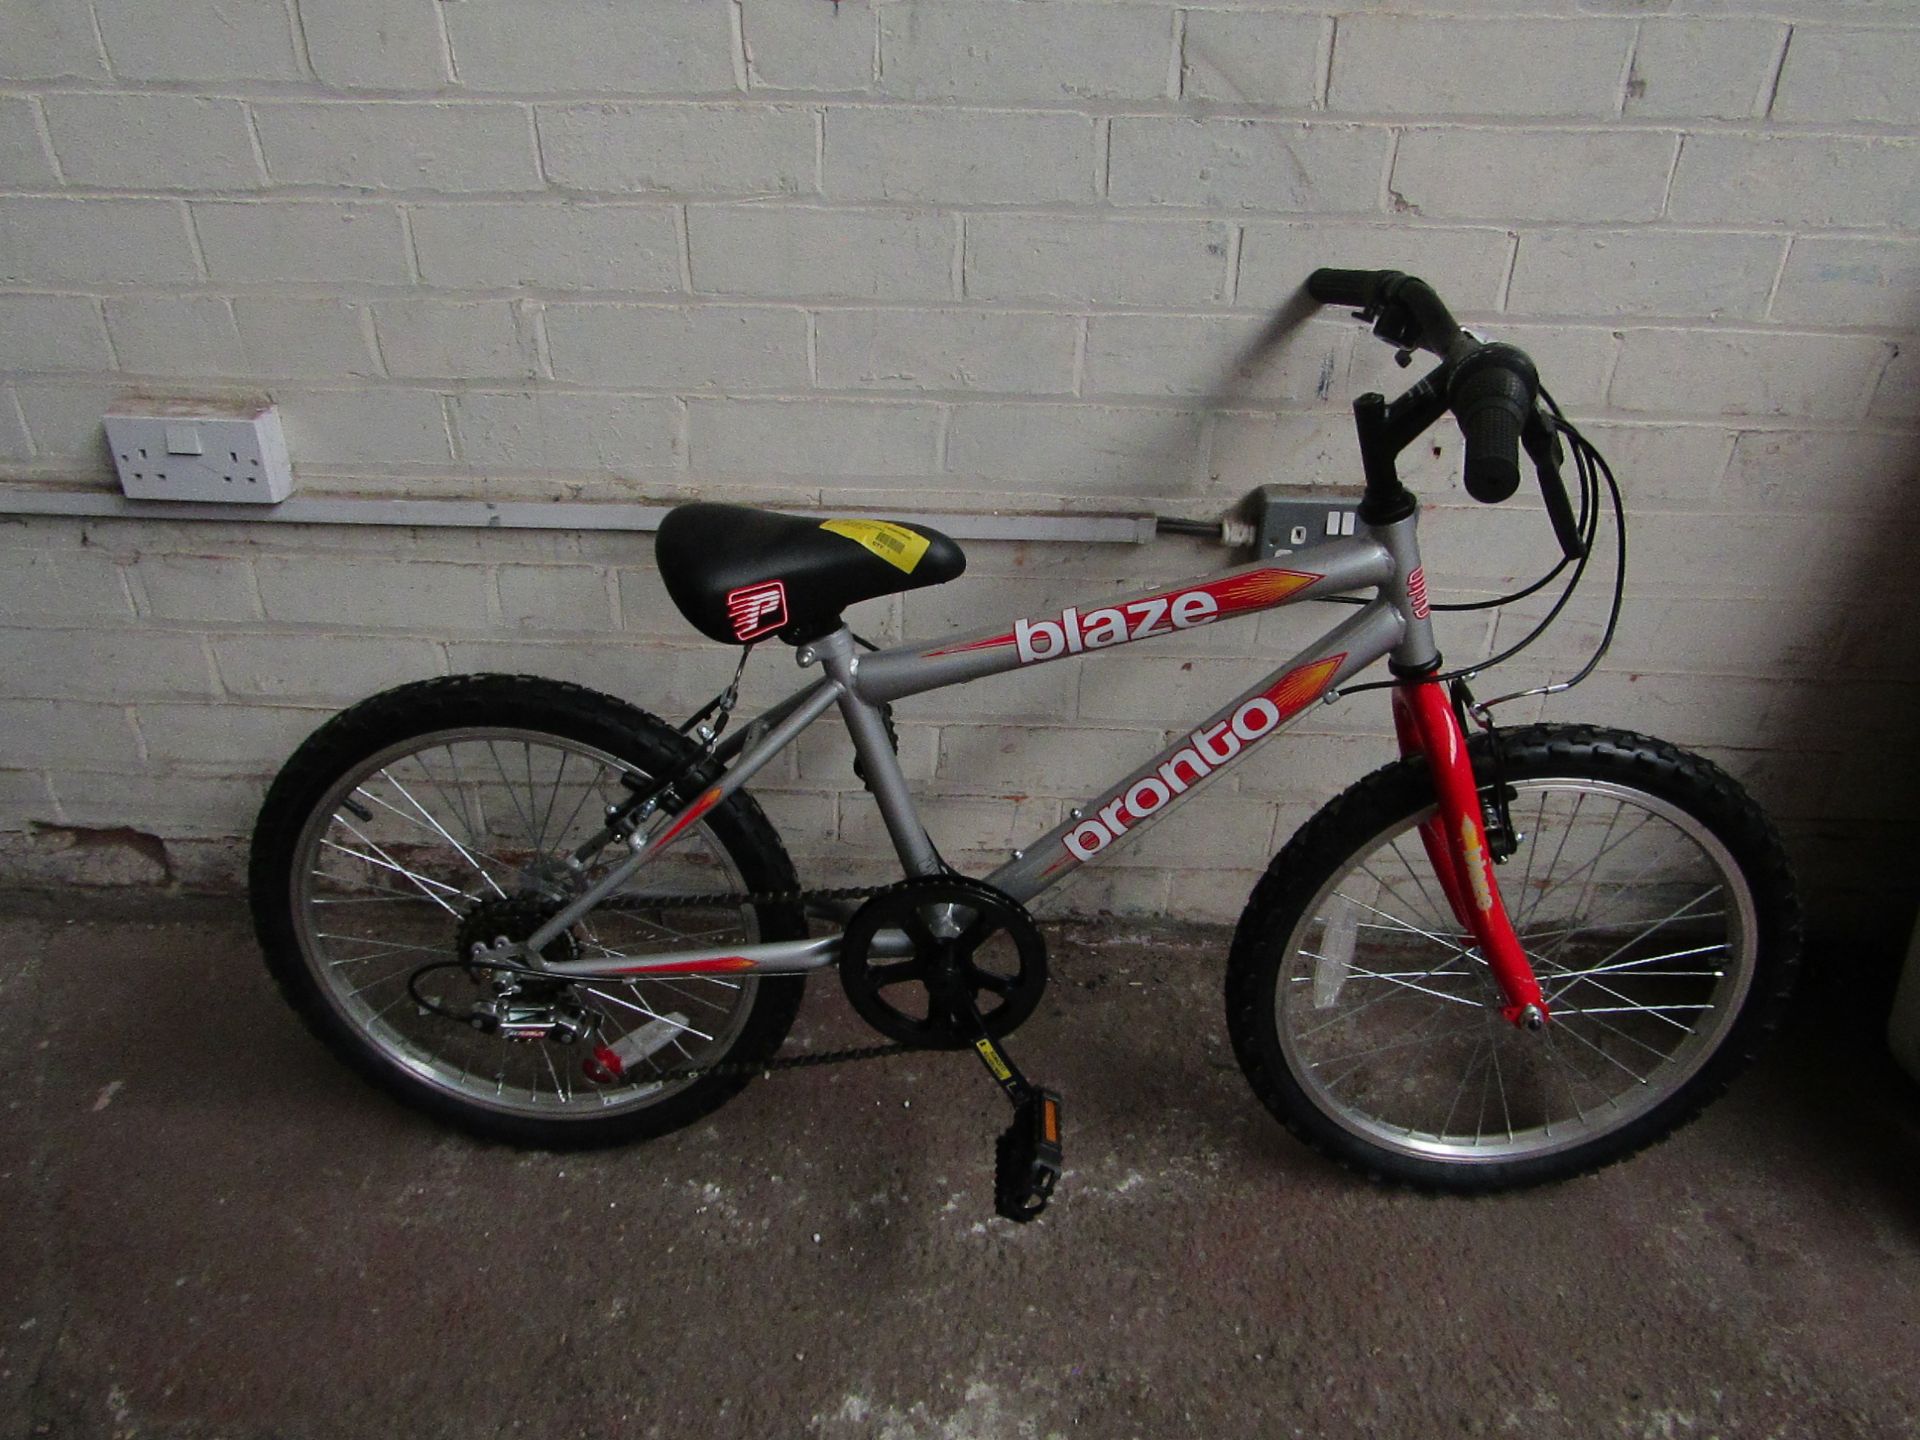 | 1X | PRONTO BLAZE 20 INCH CHILDREN BICYCLE | USED CONDITION UNCHECKED | NO ONLINE RESALE | SKU - |